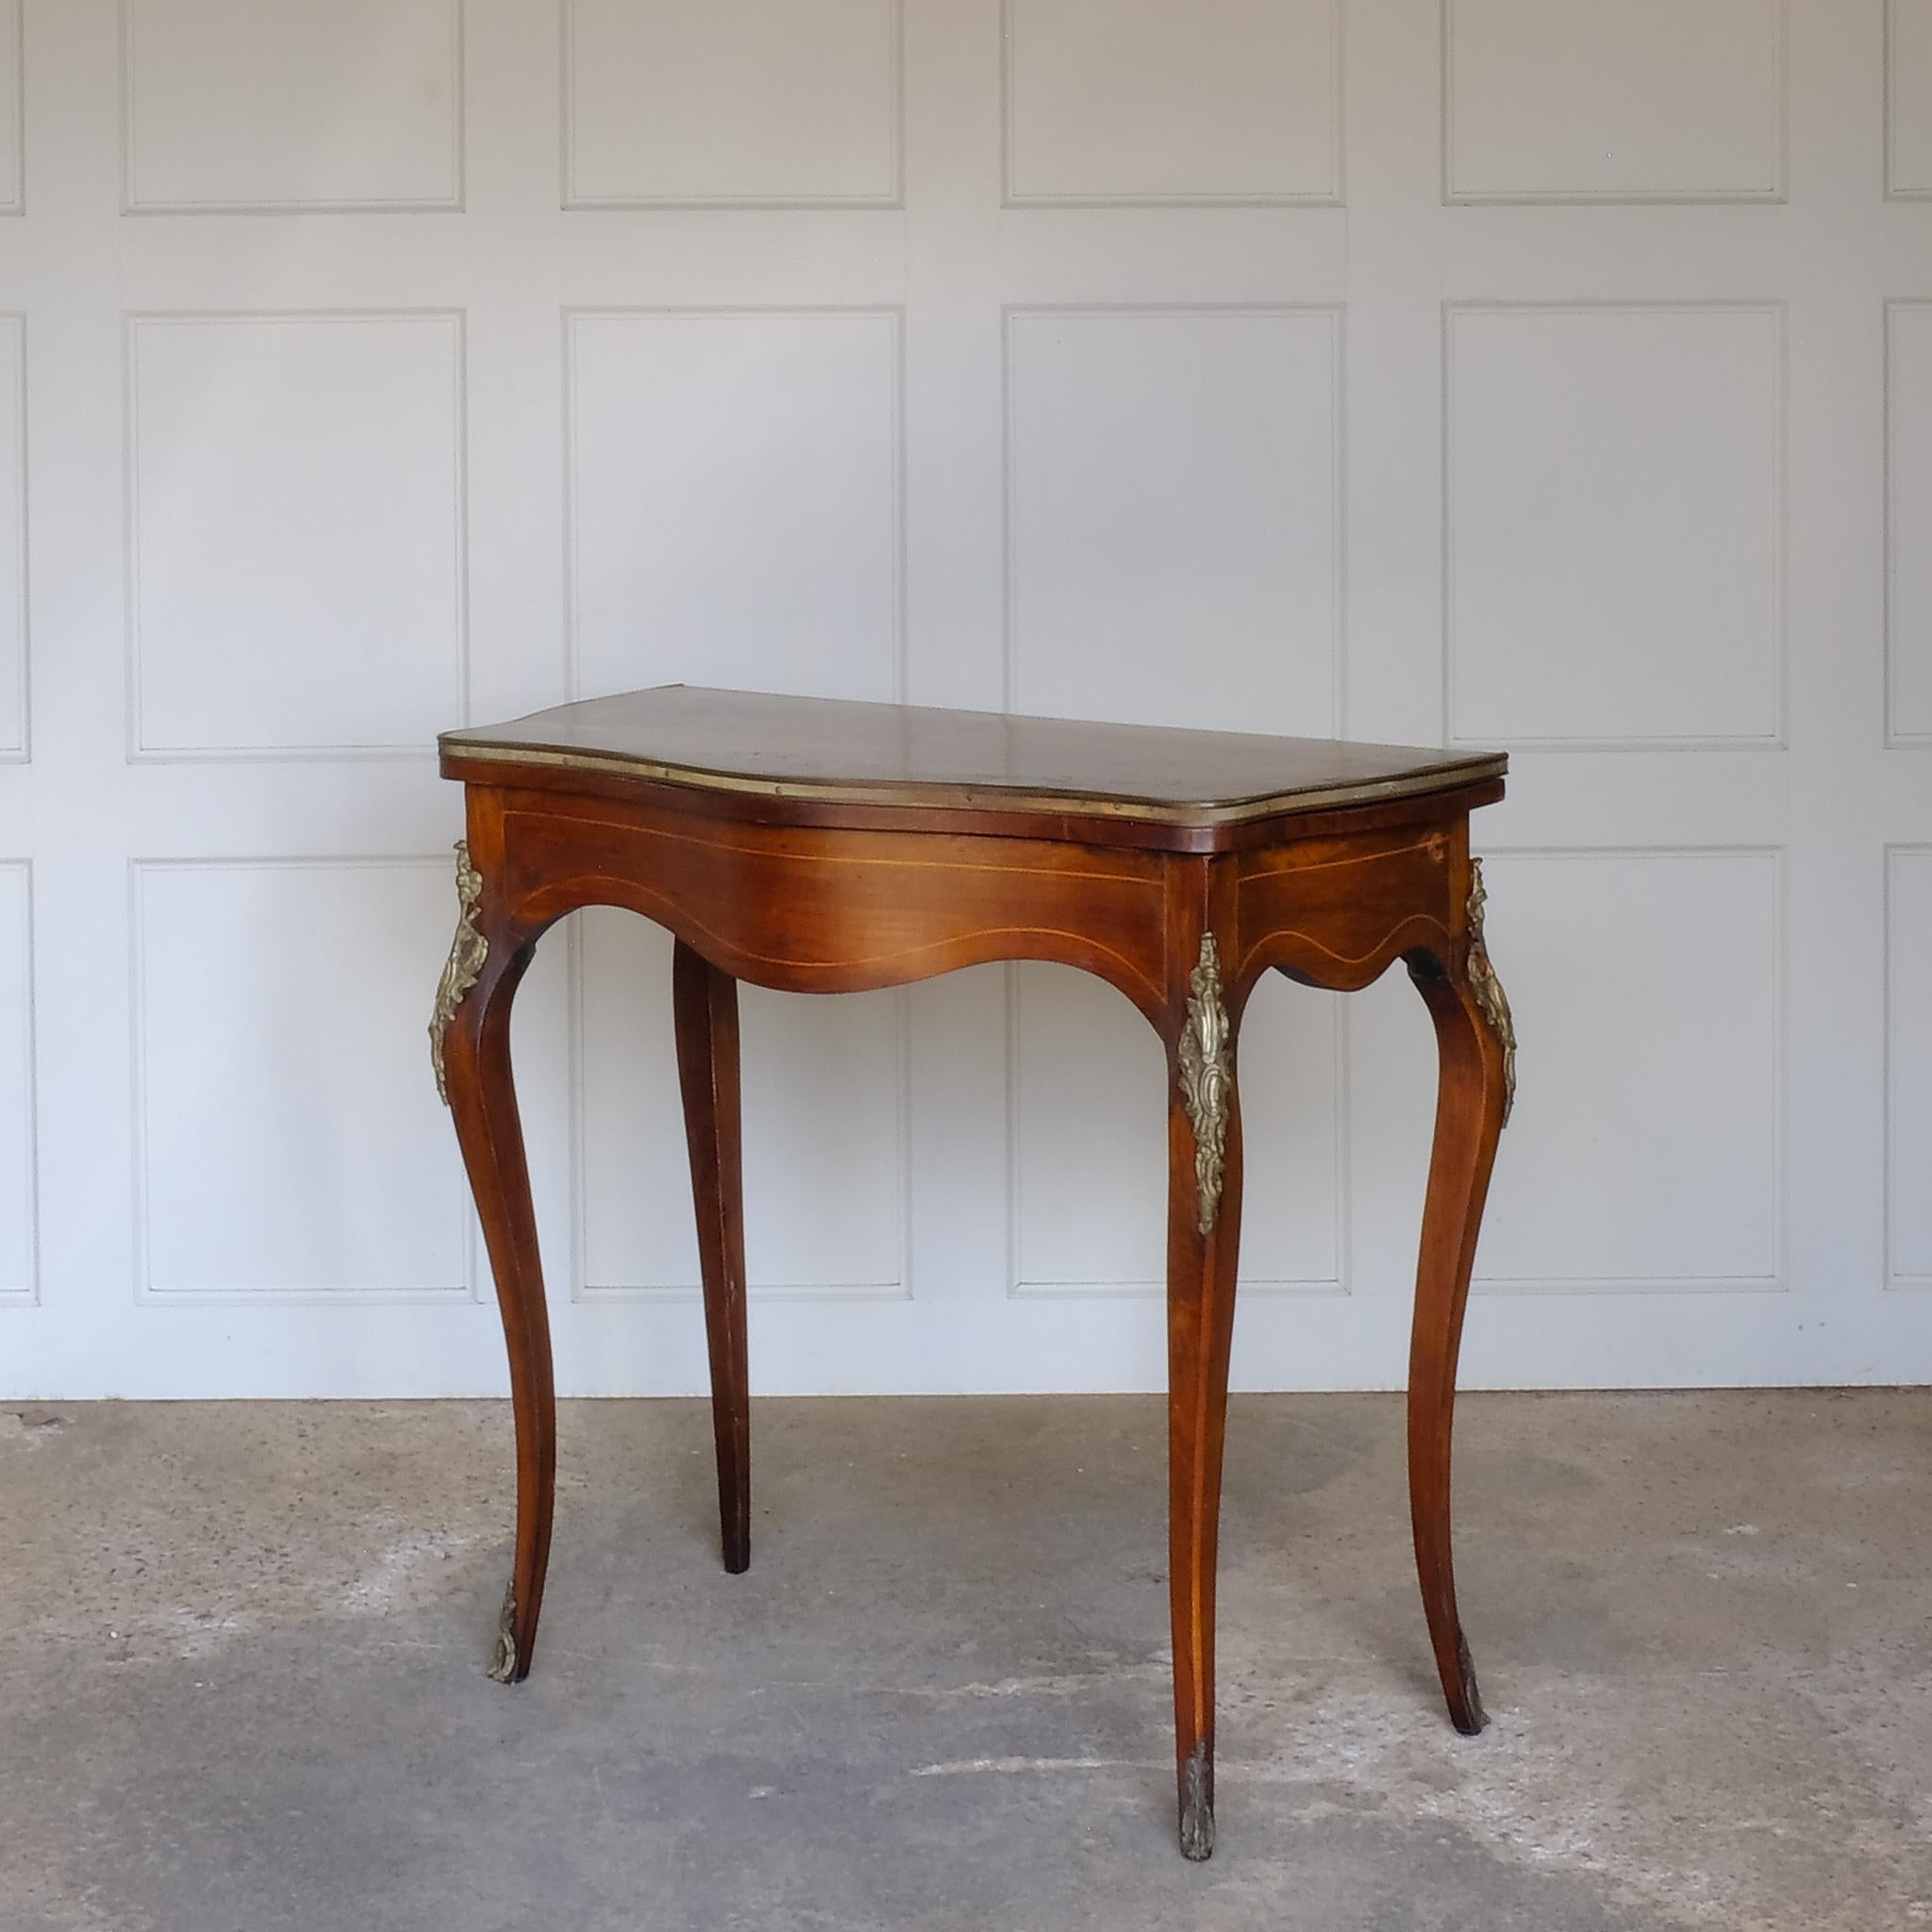 British 19th Century Walnut And Marquetry Inlaid Serpentine Card Table For Sale